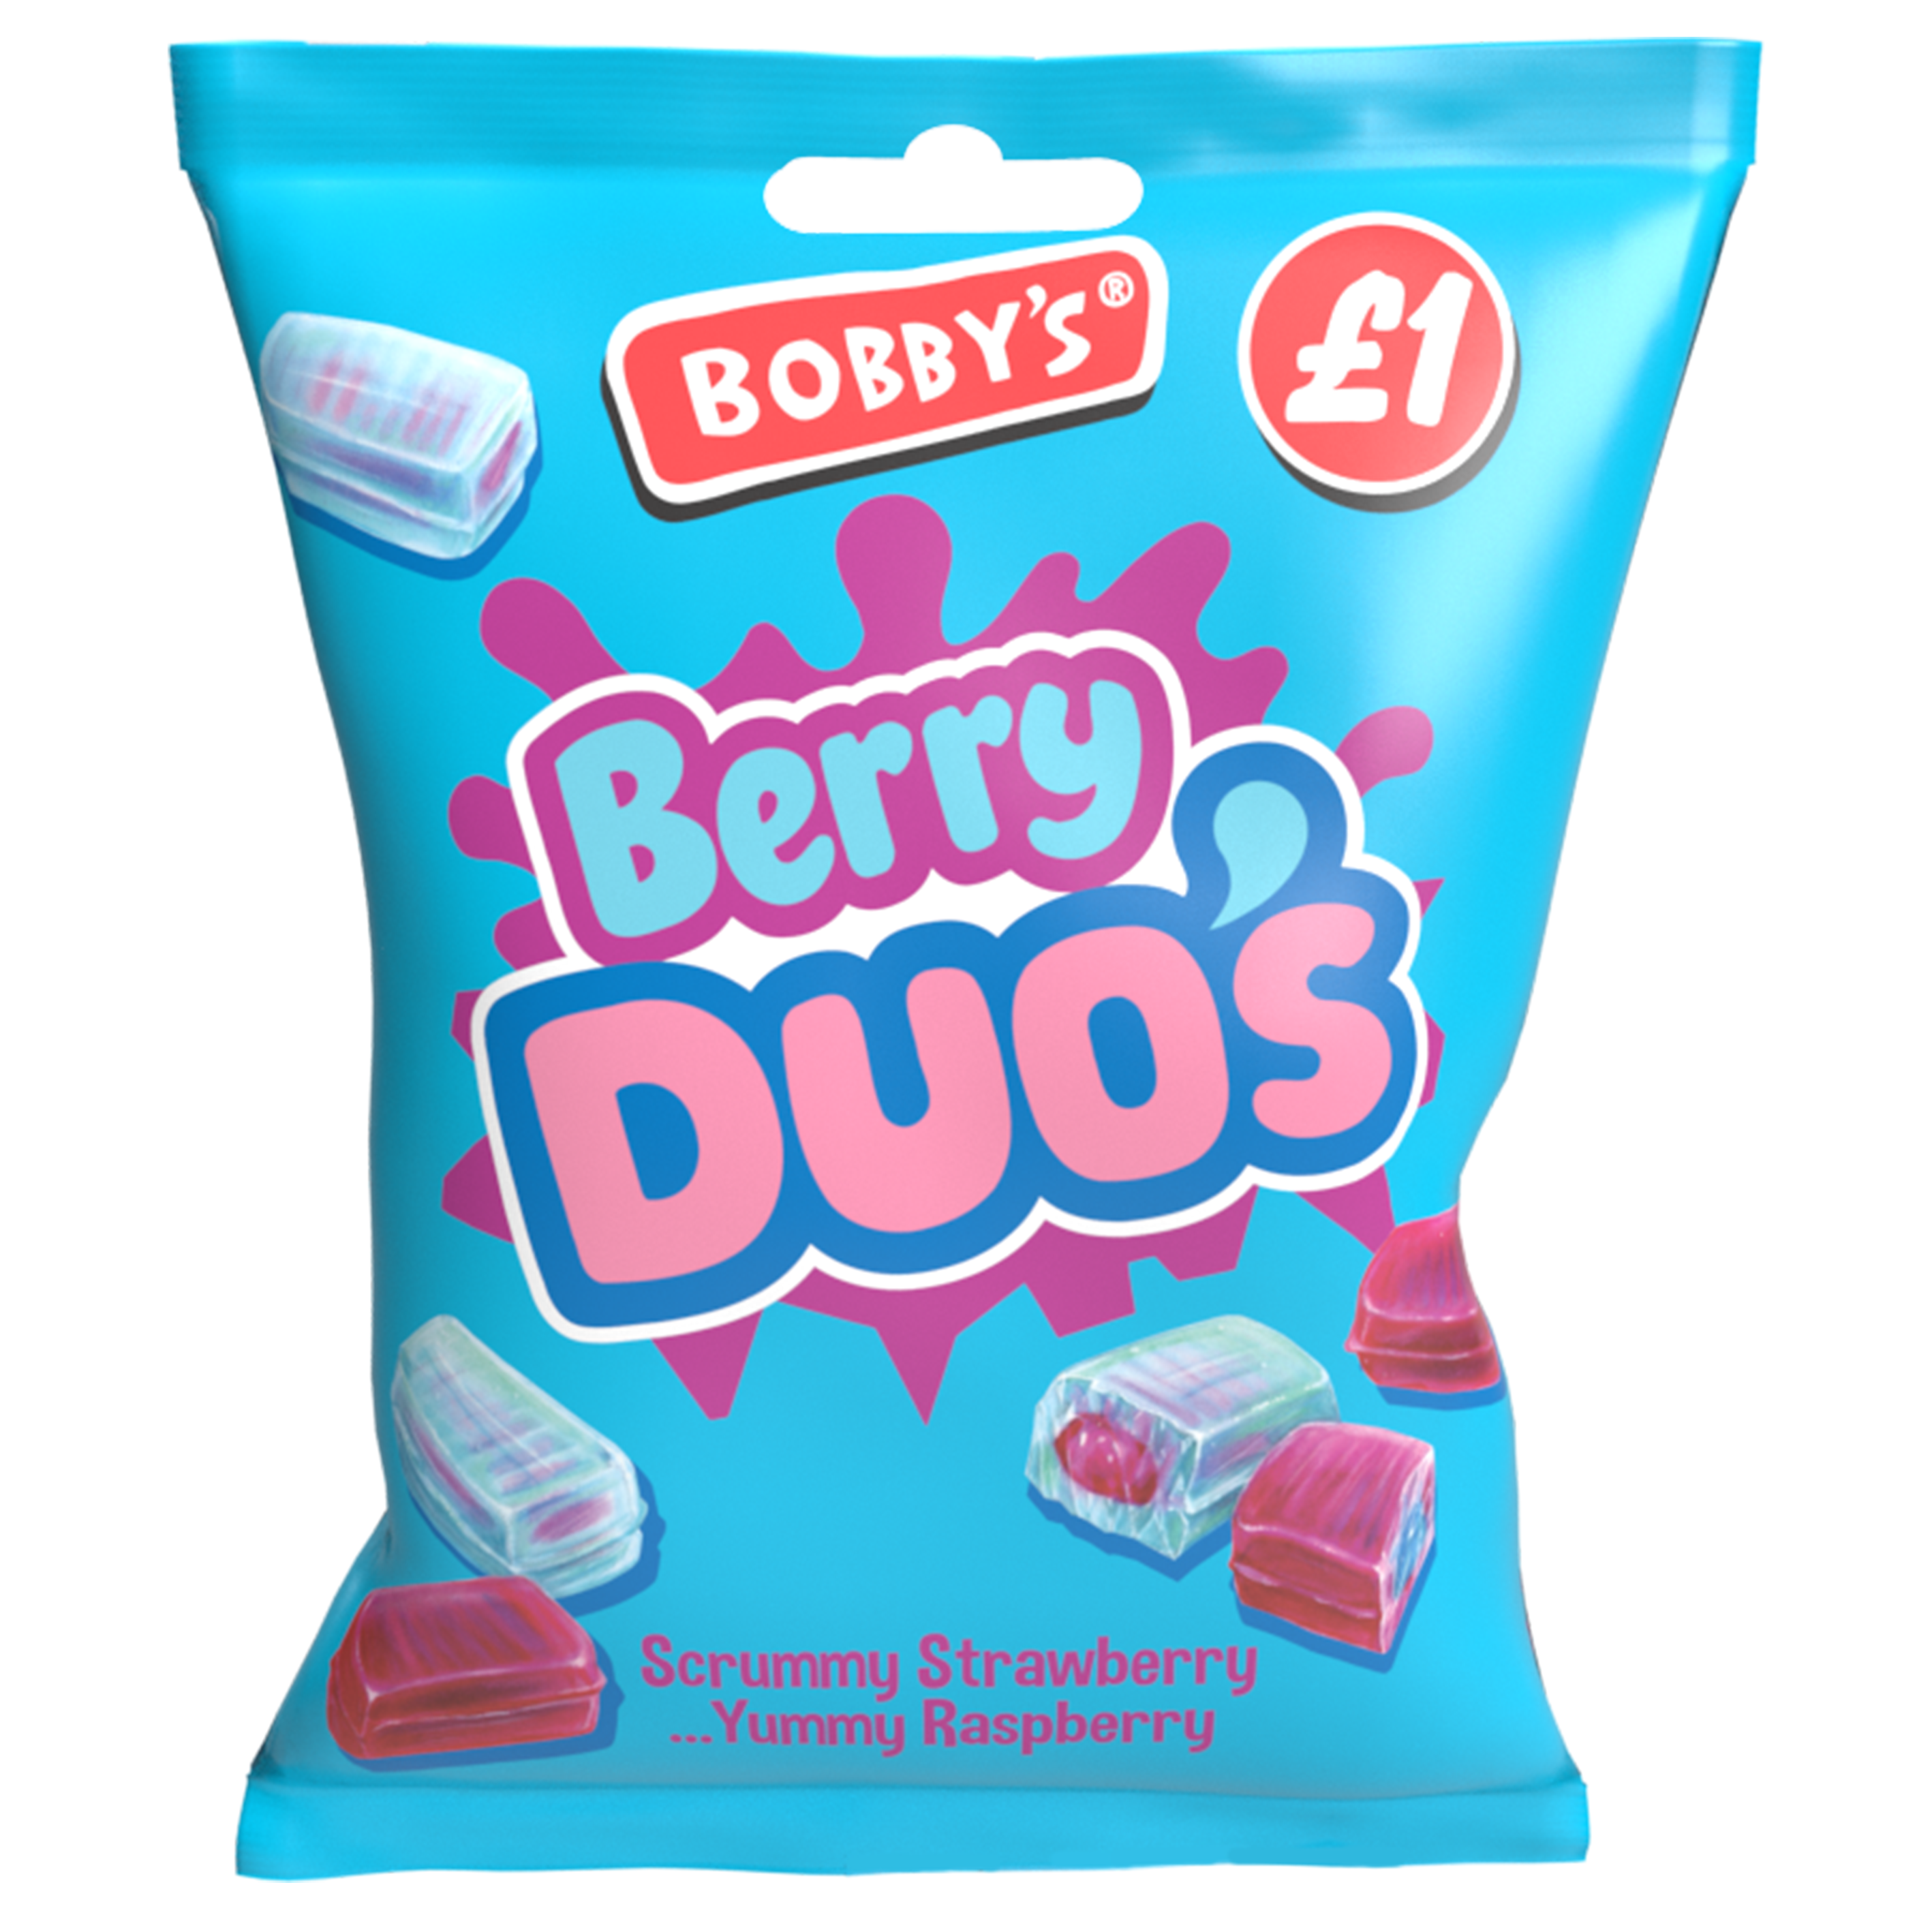 Bag some sweet sales with Bobby’s new bagged sweets